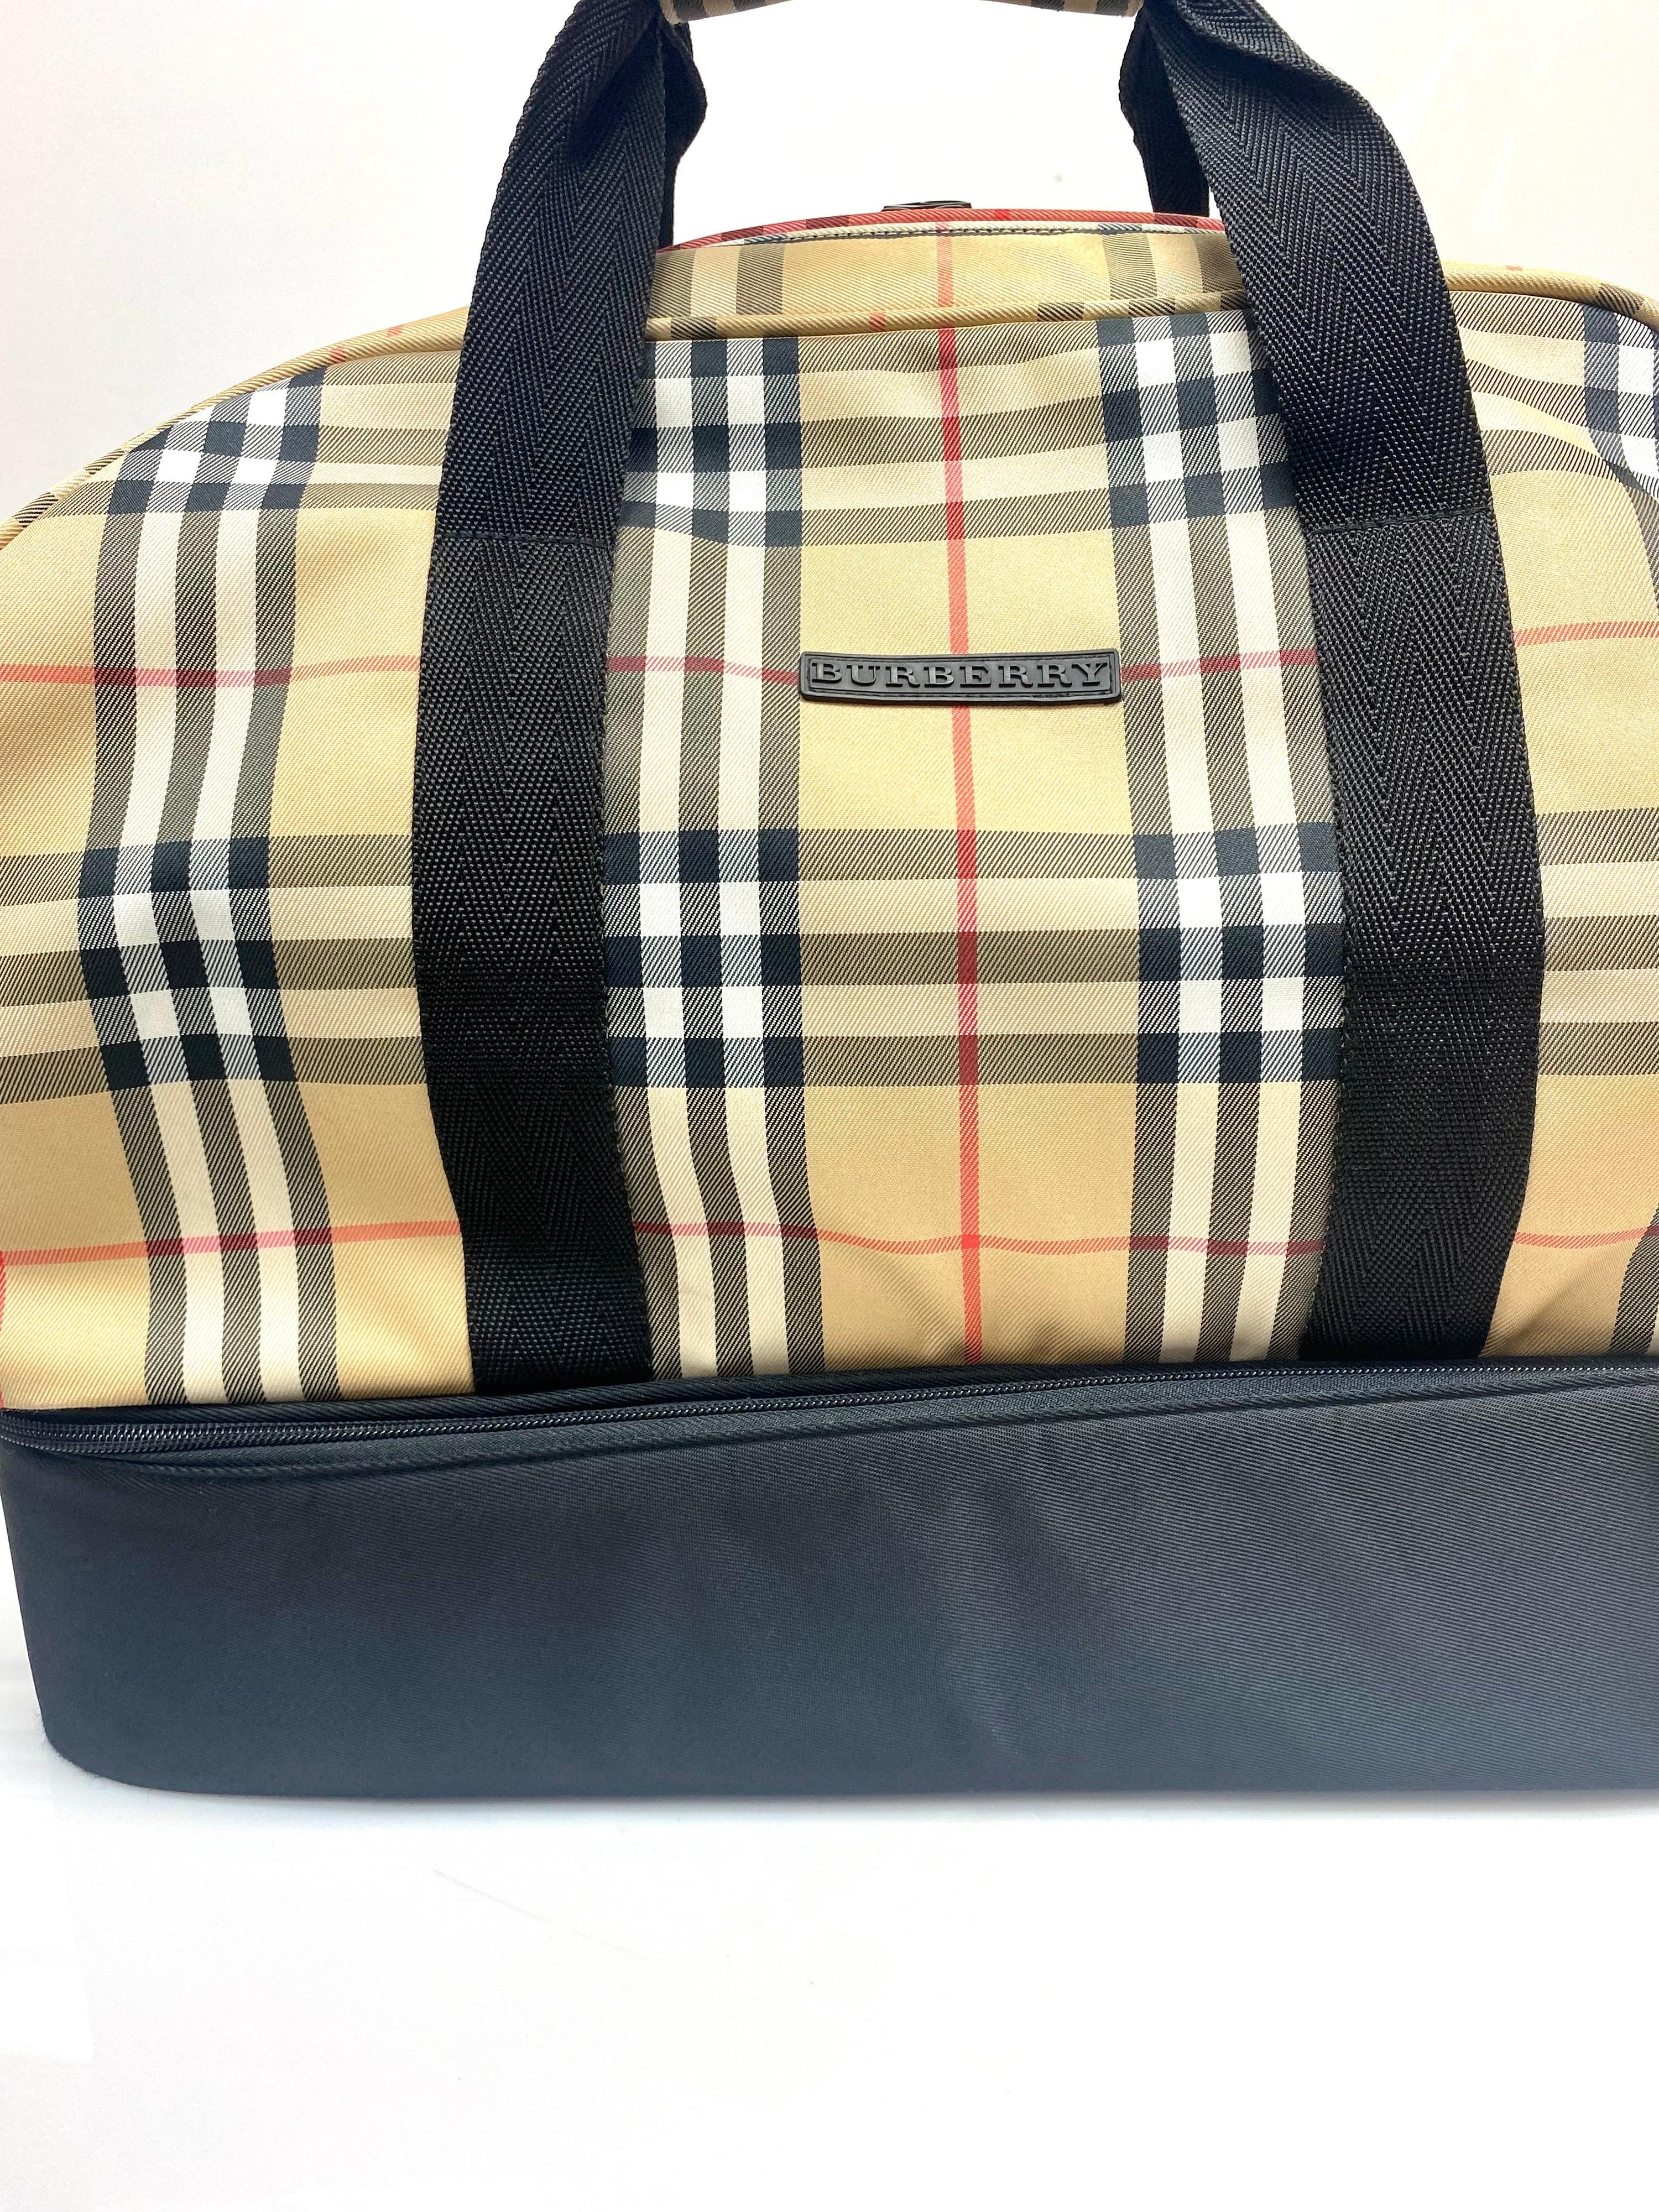 This classic Burberry print golf/travel bag is the perfect size for those weekends away. Featuring the Burberry check throughout, the bag has one large, zipped bottom compartment and another interior zipped flap. Item is in excellent condition with